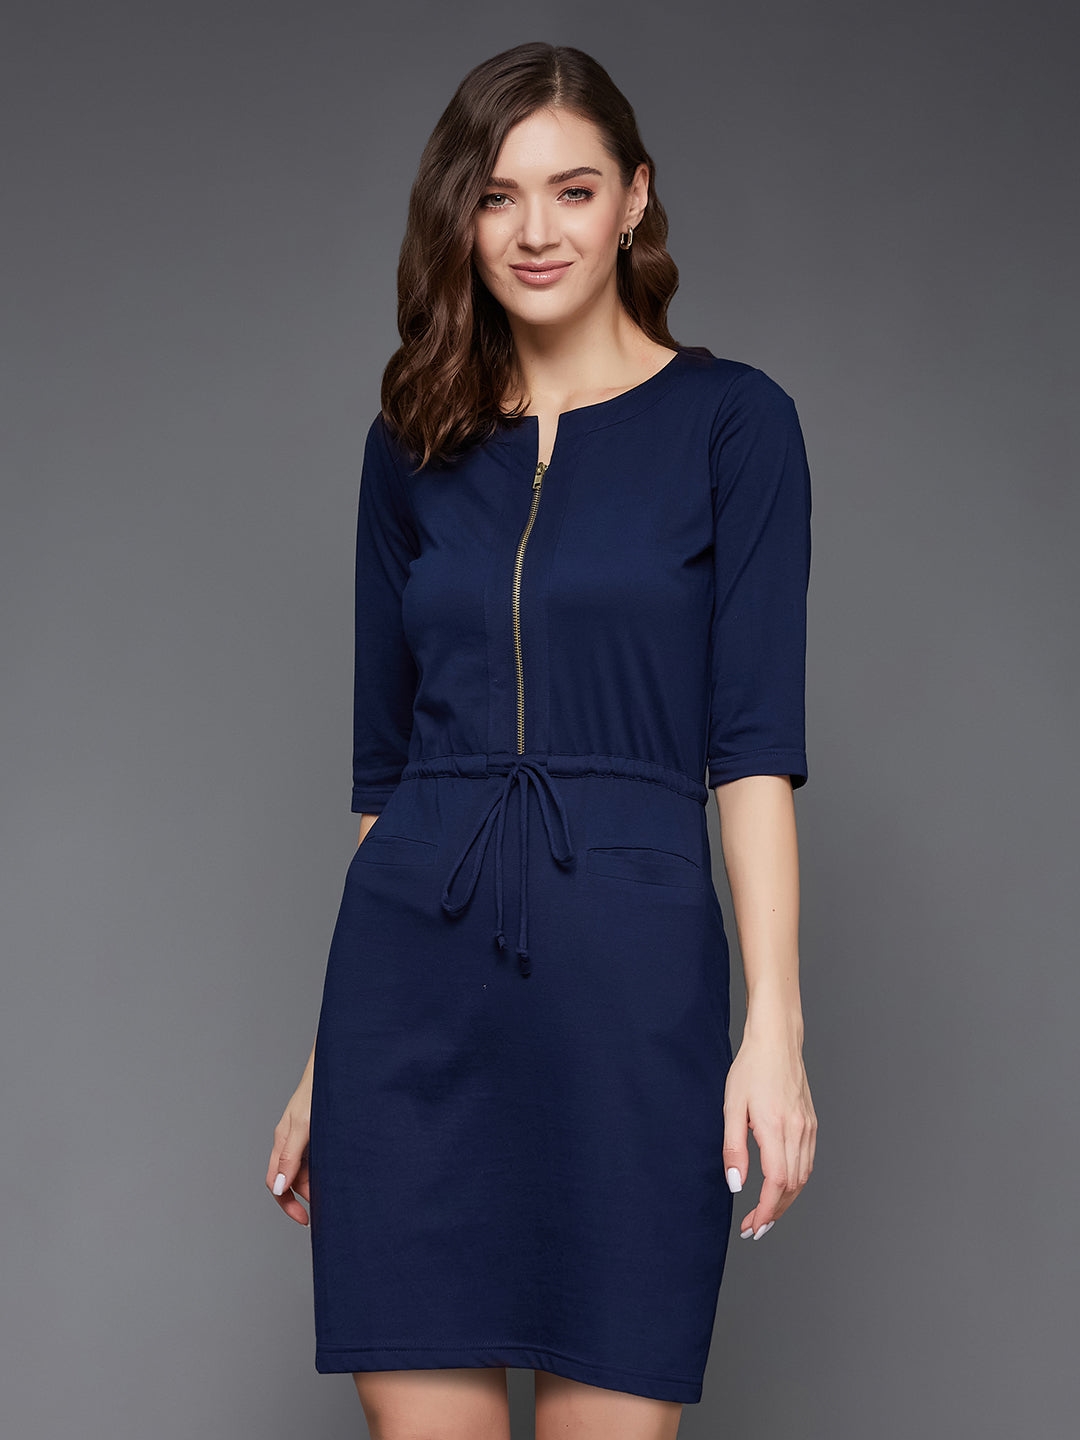 MISS CHASE | Navy Blue Round Neck 3/4 Sleeves Cotton Solid Mini Shift Dress